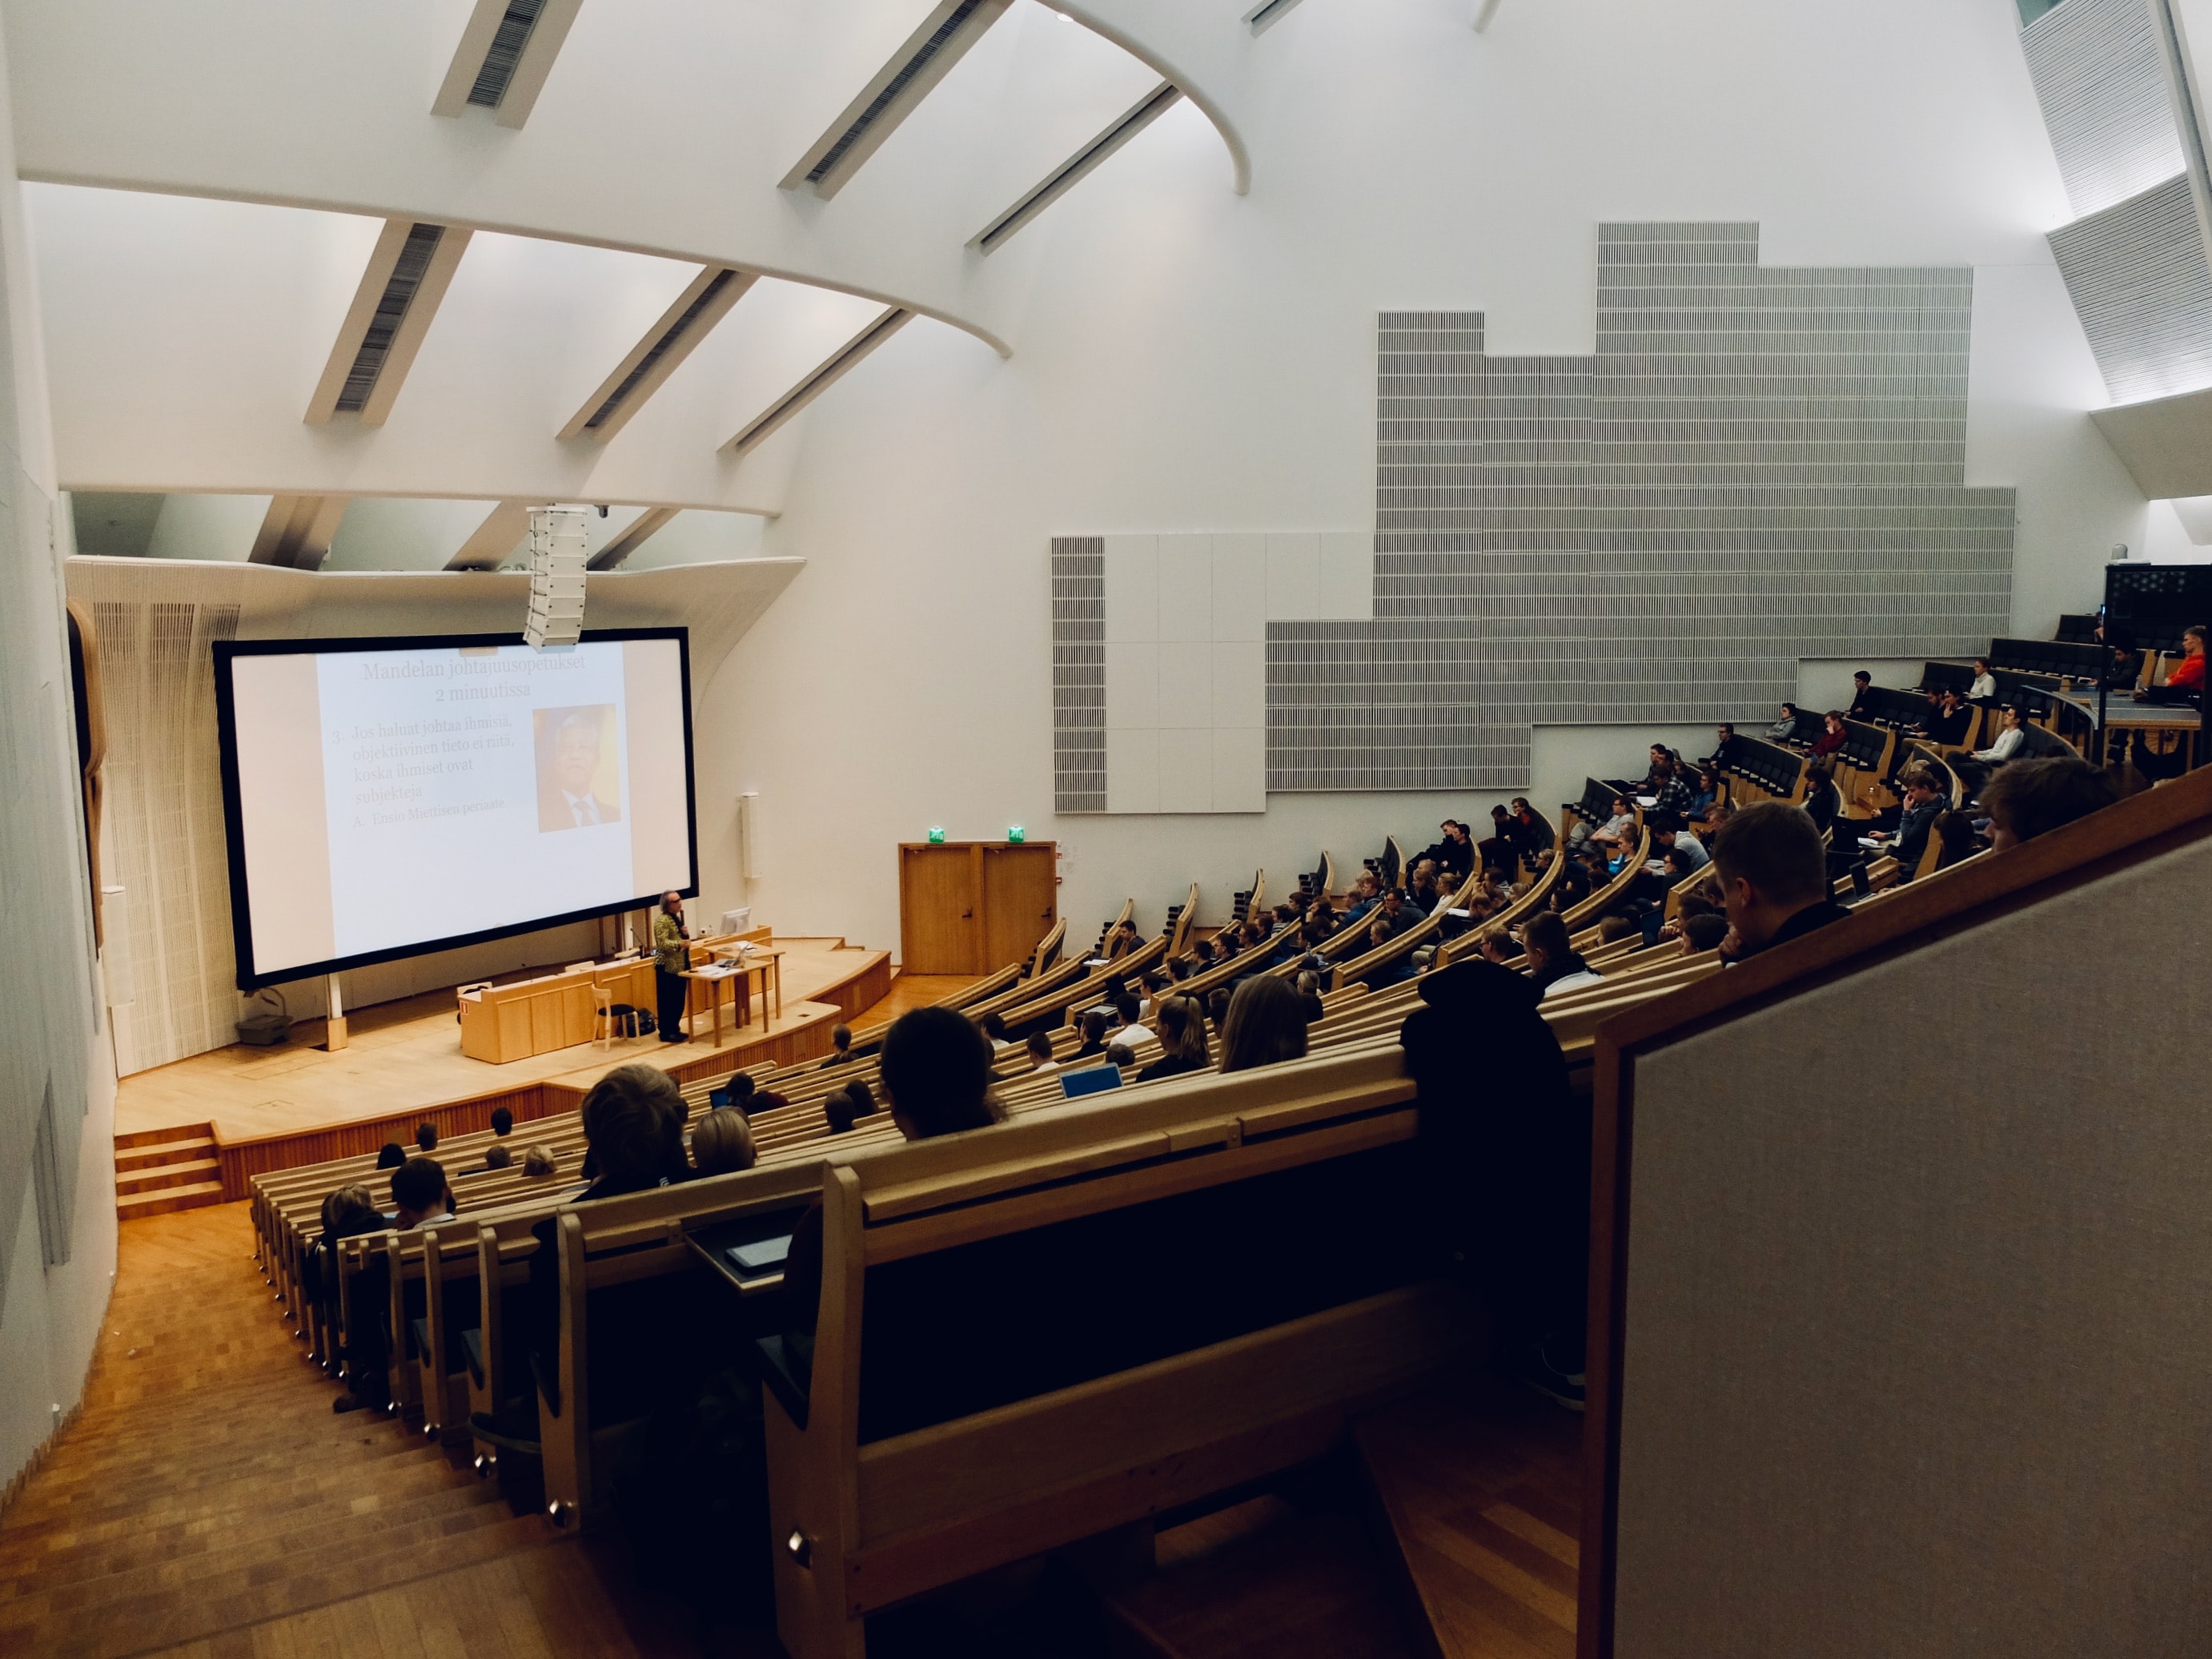 Large modern university lecture hall with teacher presenting in the distance